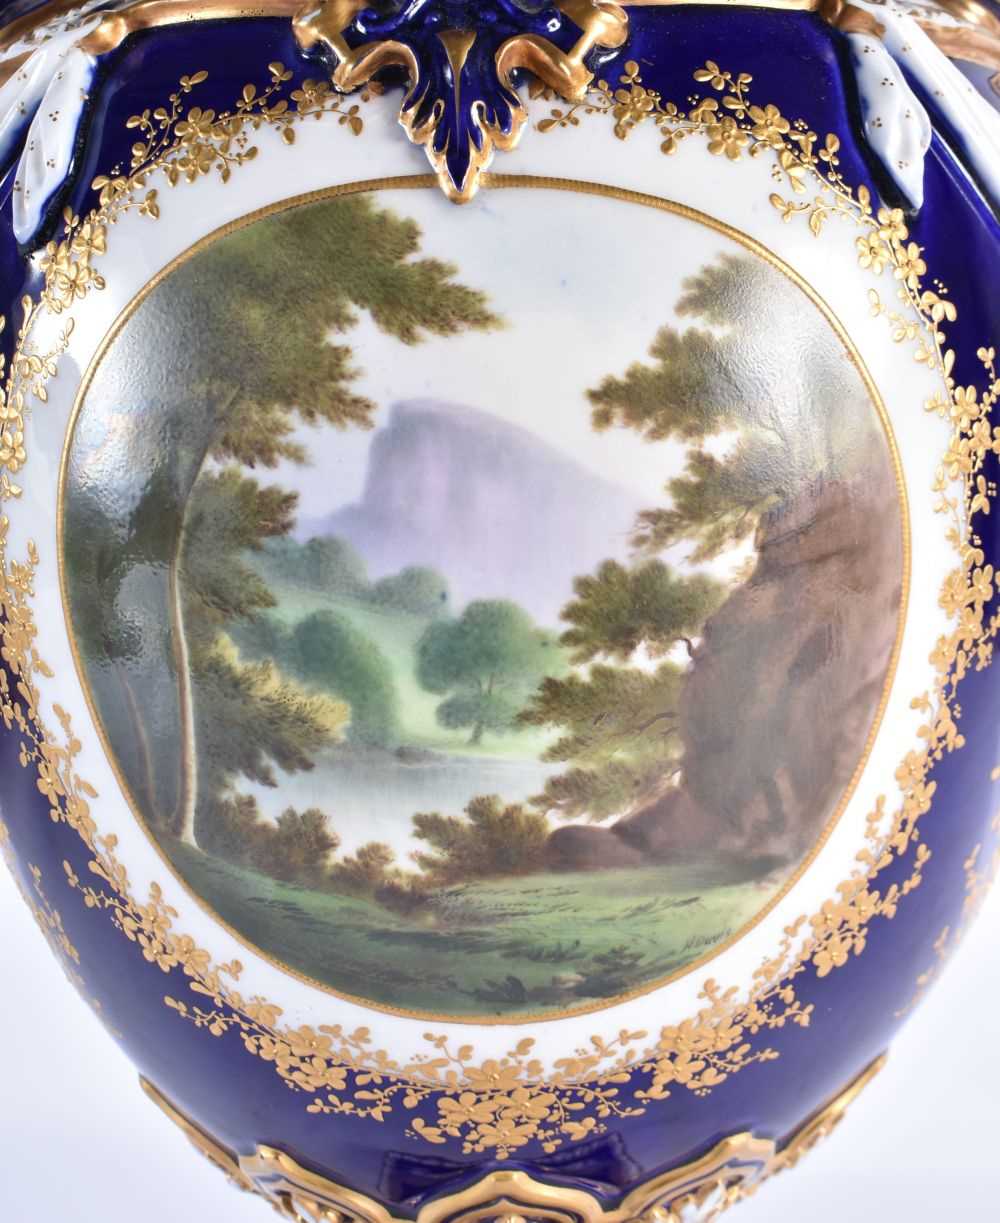 A FINE ROYAL WORCESTER TWIN HANDLED BLUE PORCELAIN VASE AND COVER painted with a landscape by - Image 6 of 9